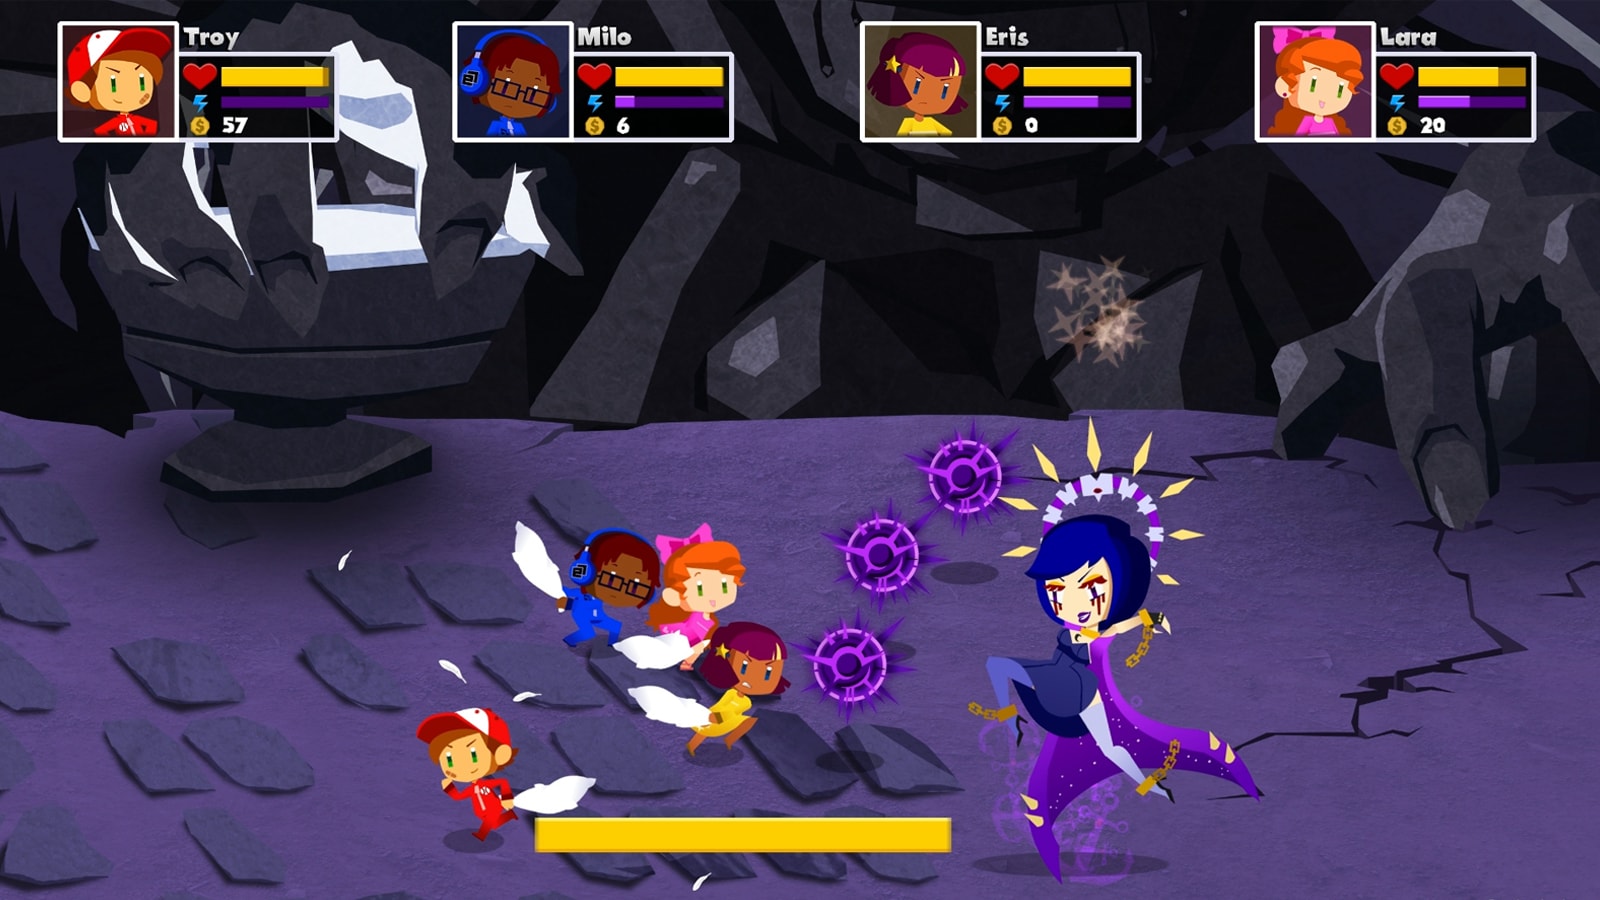 The four main characters swing their pillows at the game's primary villain, Nyx, goddess of the night